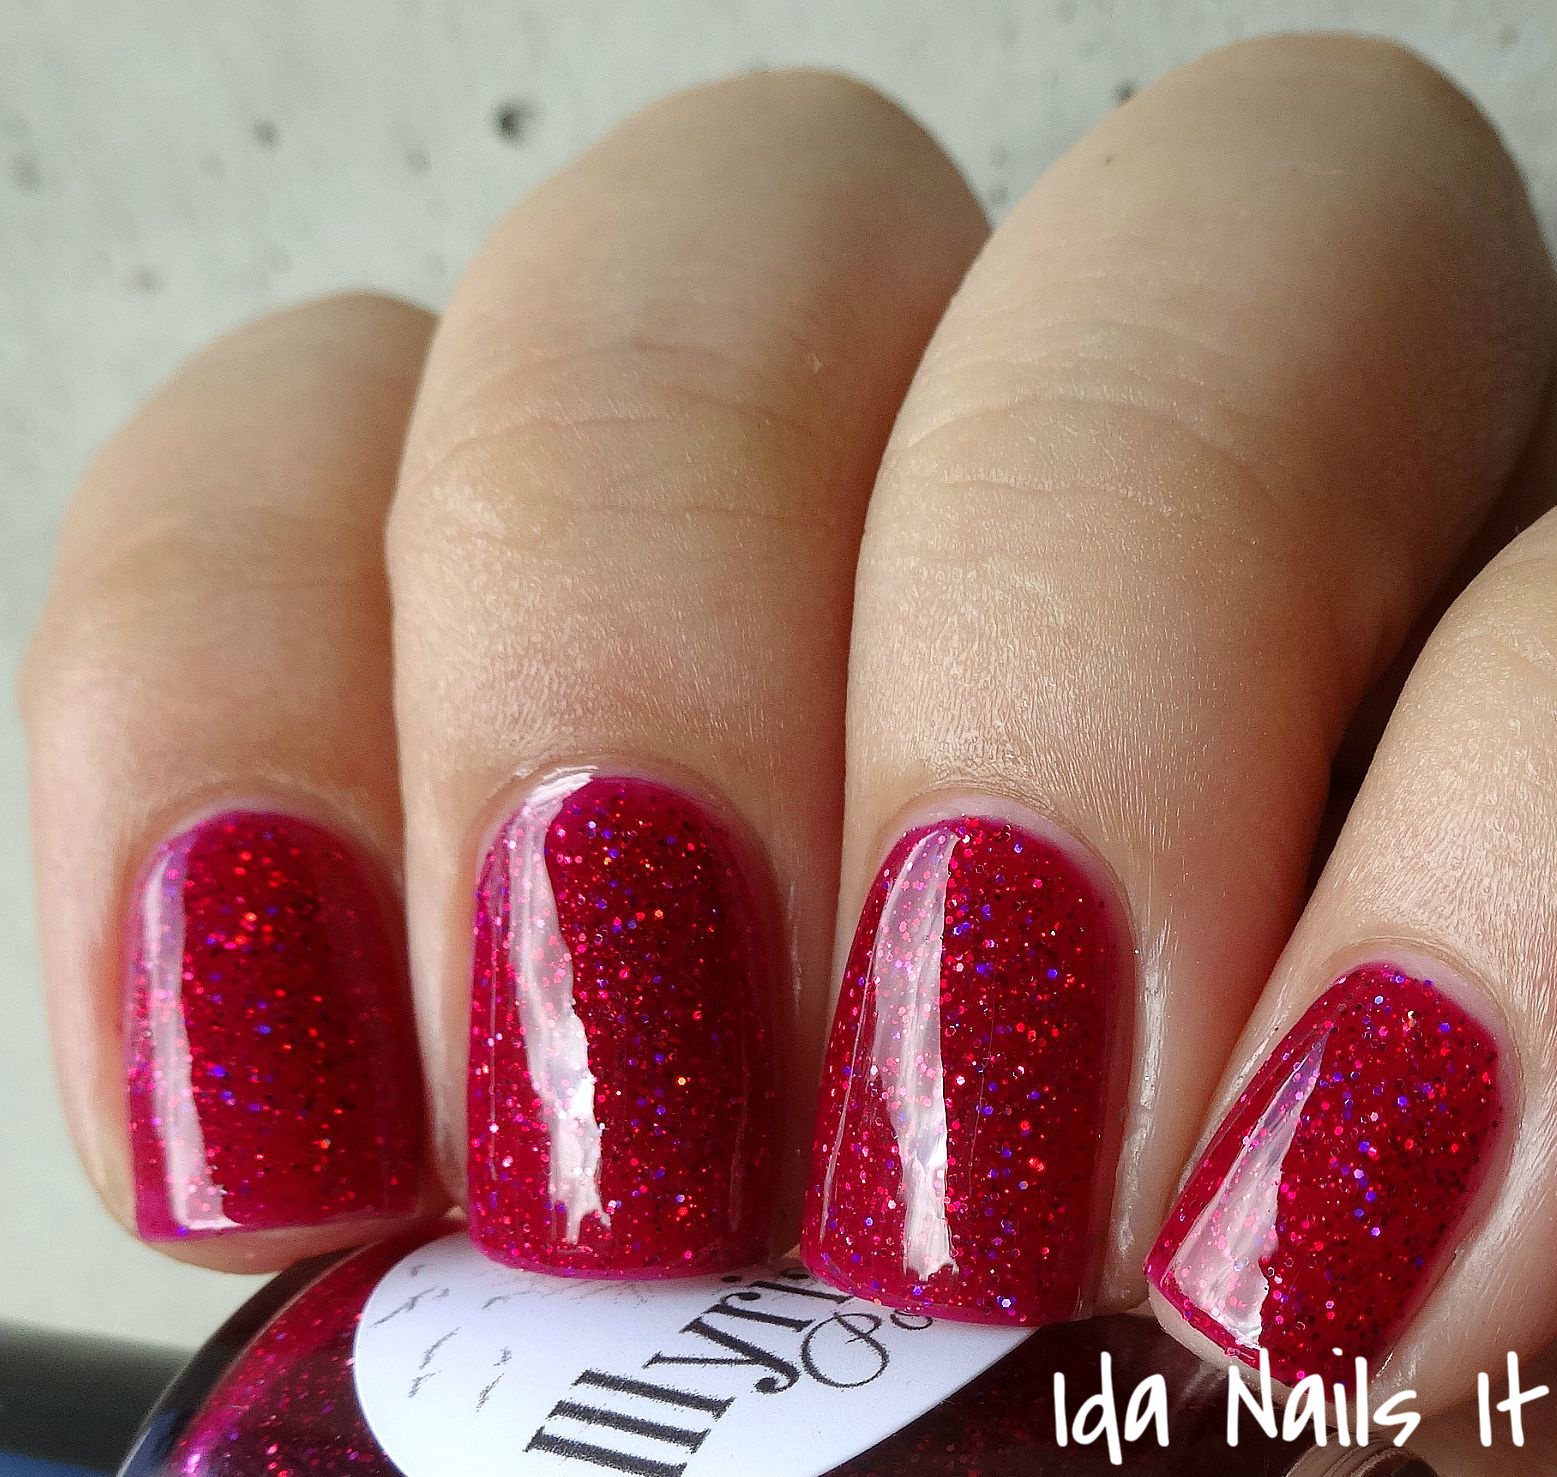 Ida Nails It: Illyrian Polish The Nostalgic Collection: Swatches and Review